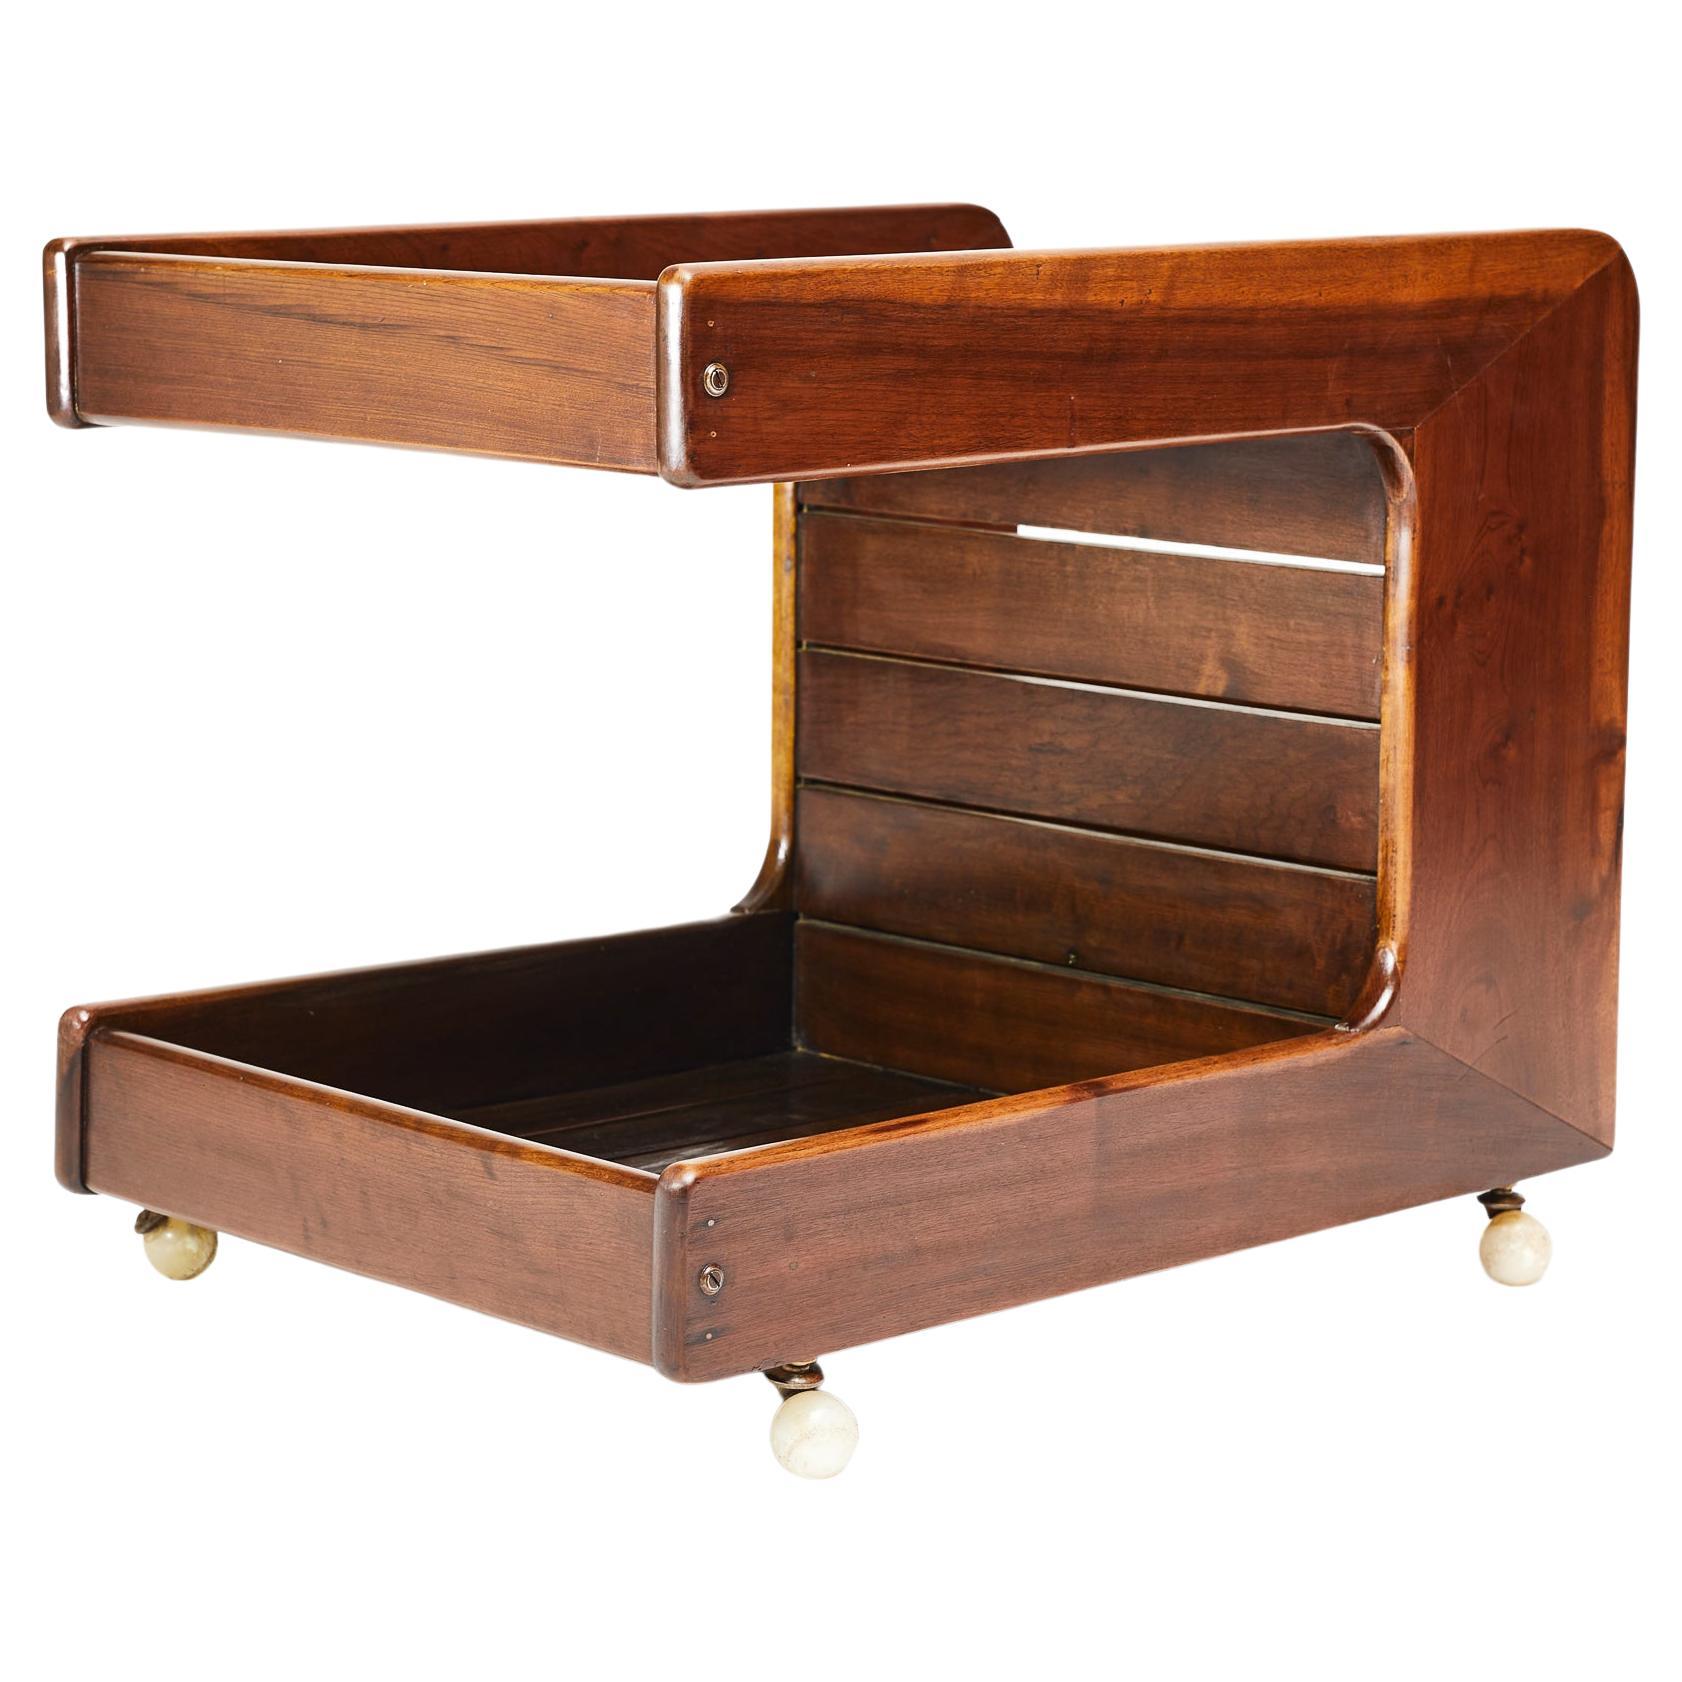 Available today, this one-of-a-kind Brazilian Modern bar cart in imbuia hardwood & alabaster wheels designed by Casa Finland in the sixties is stunning!

This rare, Mid-Century Modern gem is made in Imbuia hardwood and has four delicate, original